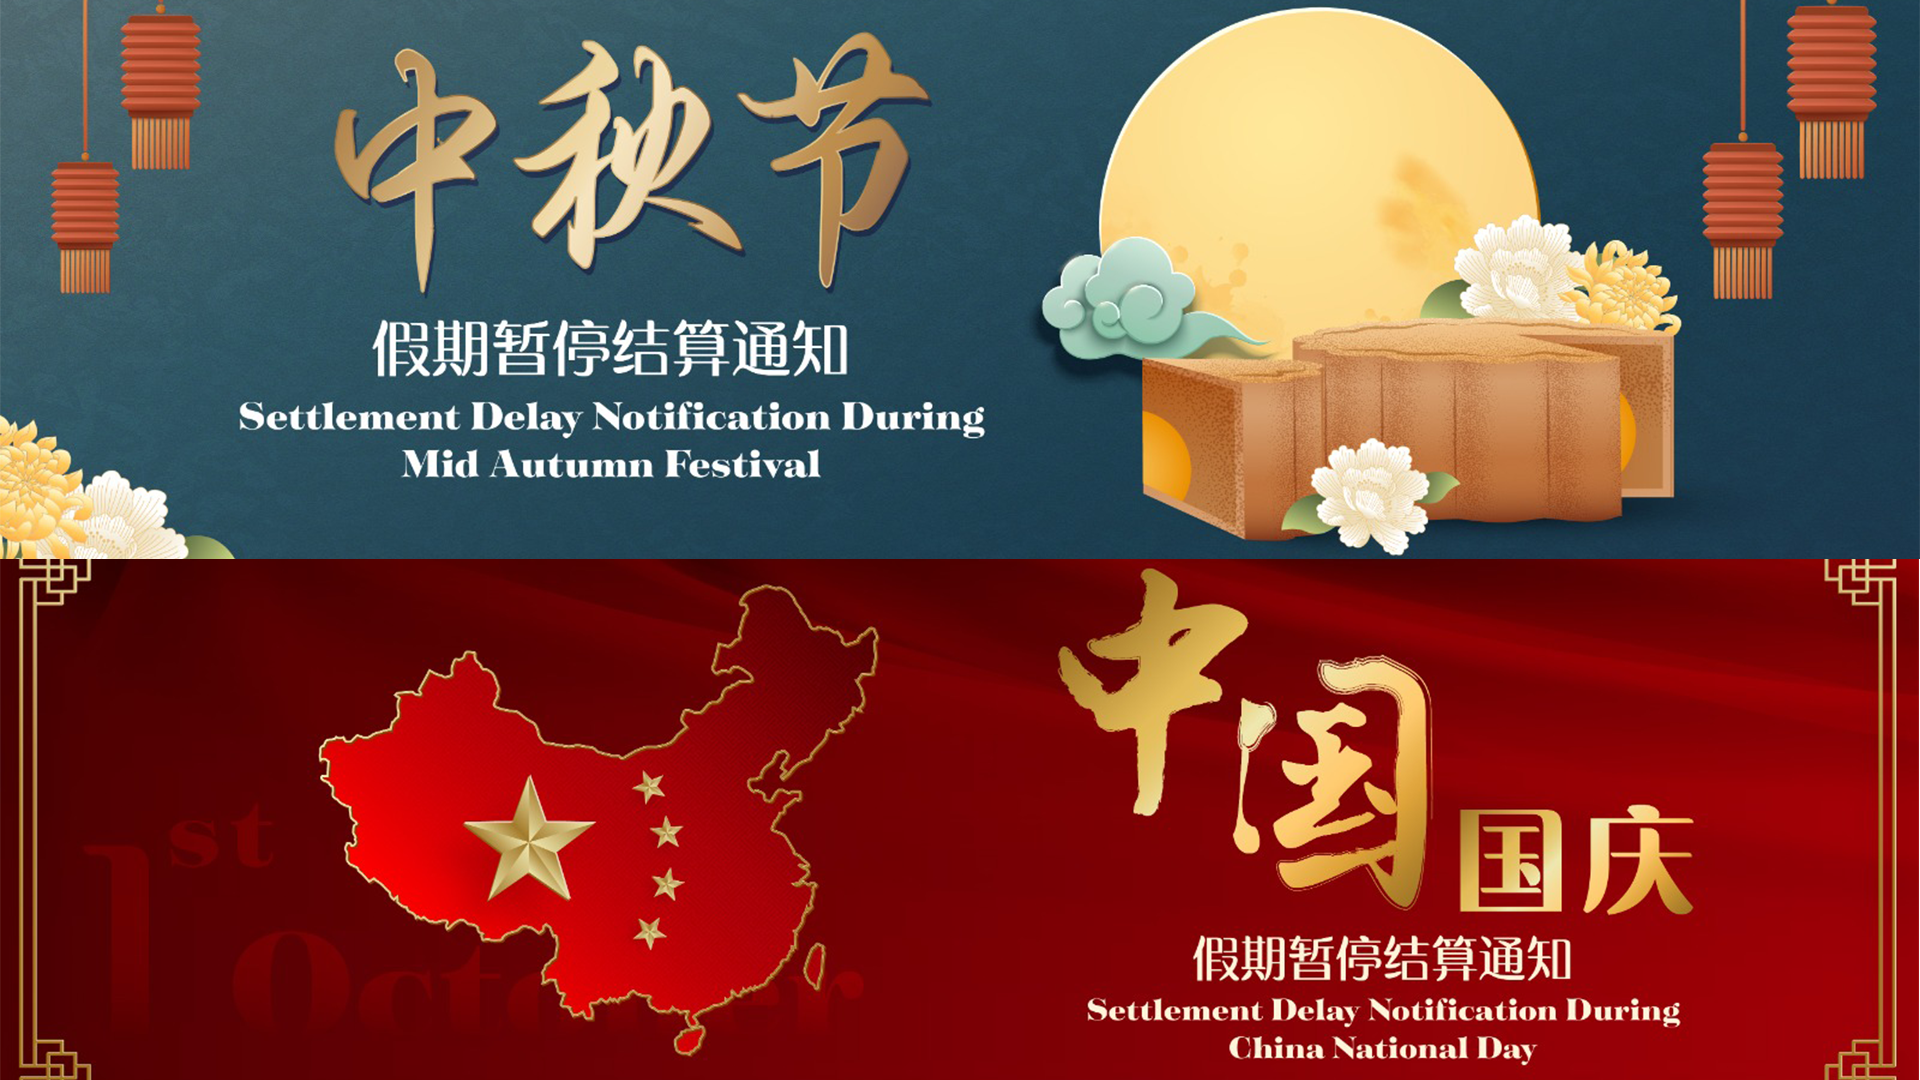 Settlement Delay Notification During Mid-Autumn Festival and National Day in China 关于2023年中国中秋节及国庆节假期暂停结算的通知